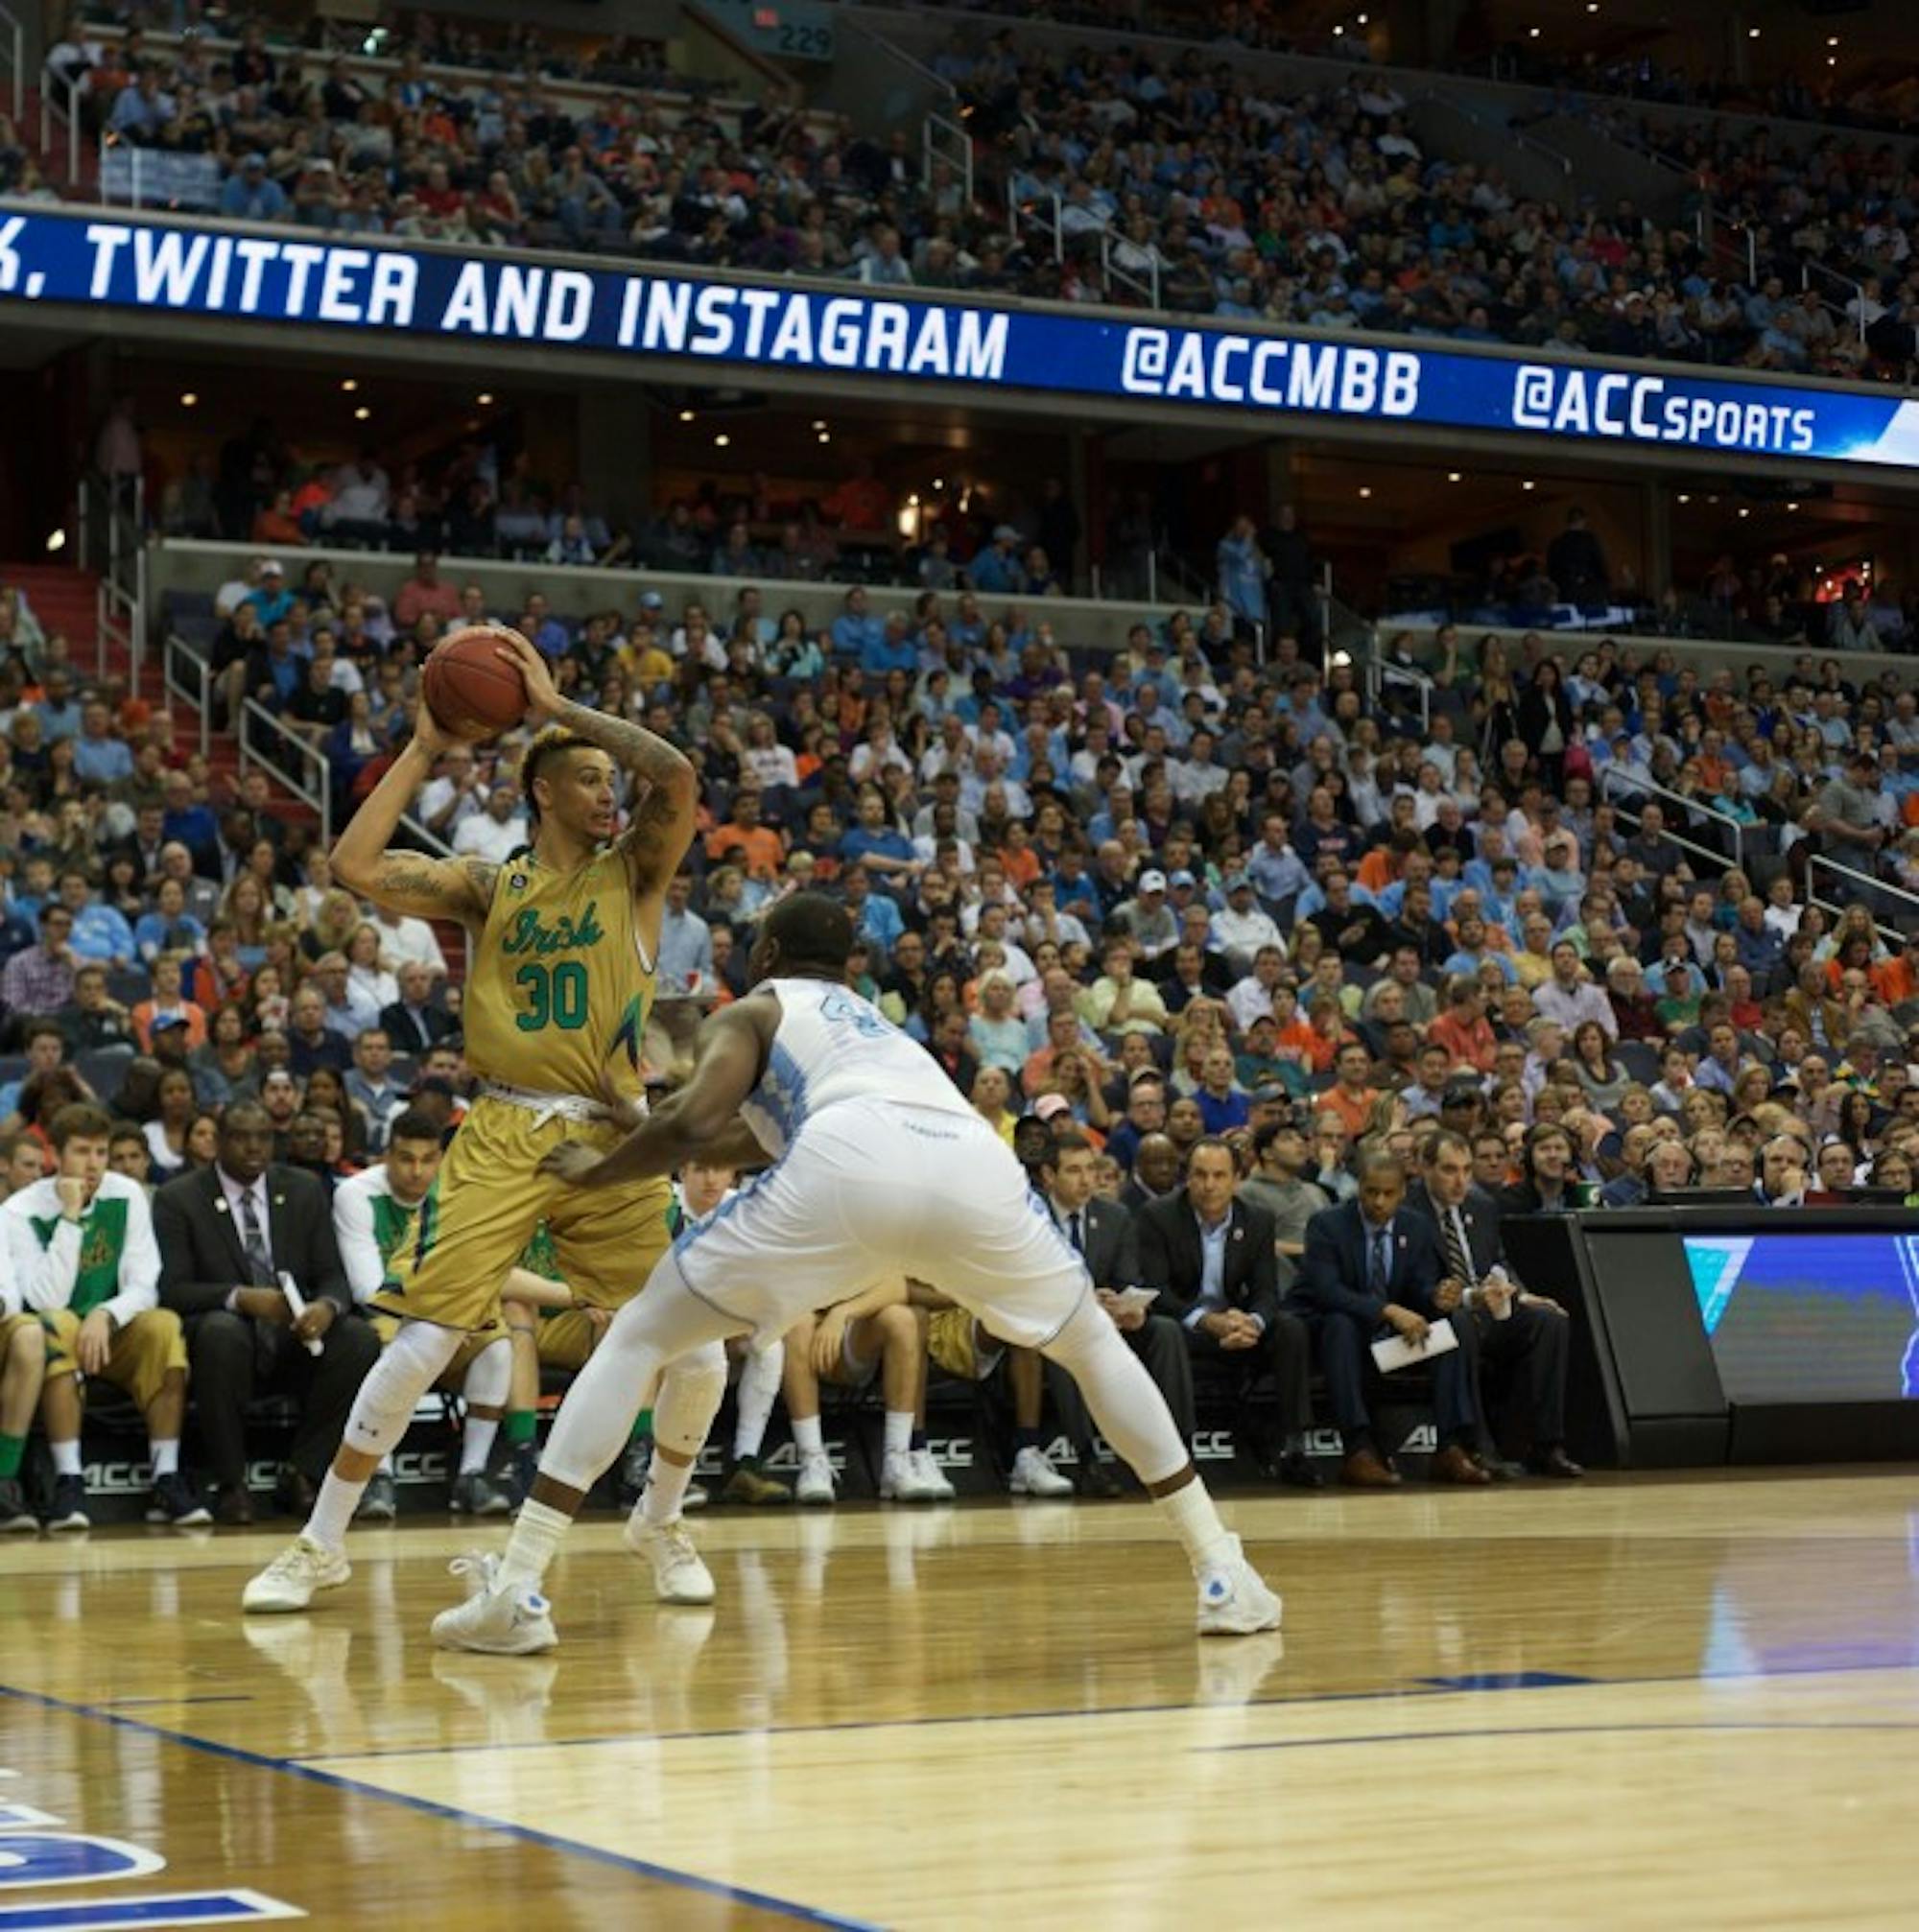 Irish senior forward Zach Auguste looks to pass during Notre Dame’s 78-47 loss against North Carolina in the ACC tournament March 11 in Washington.